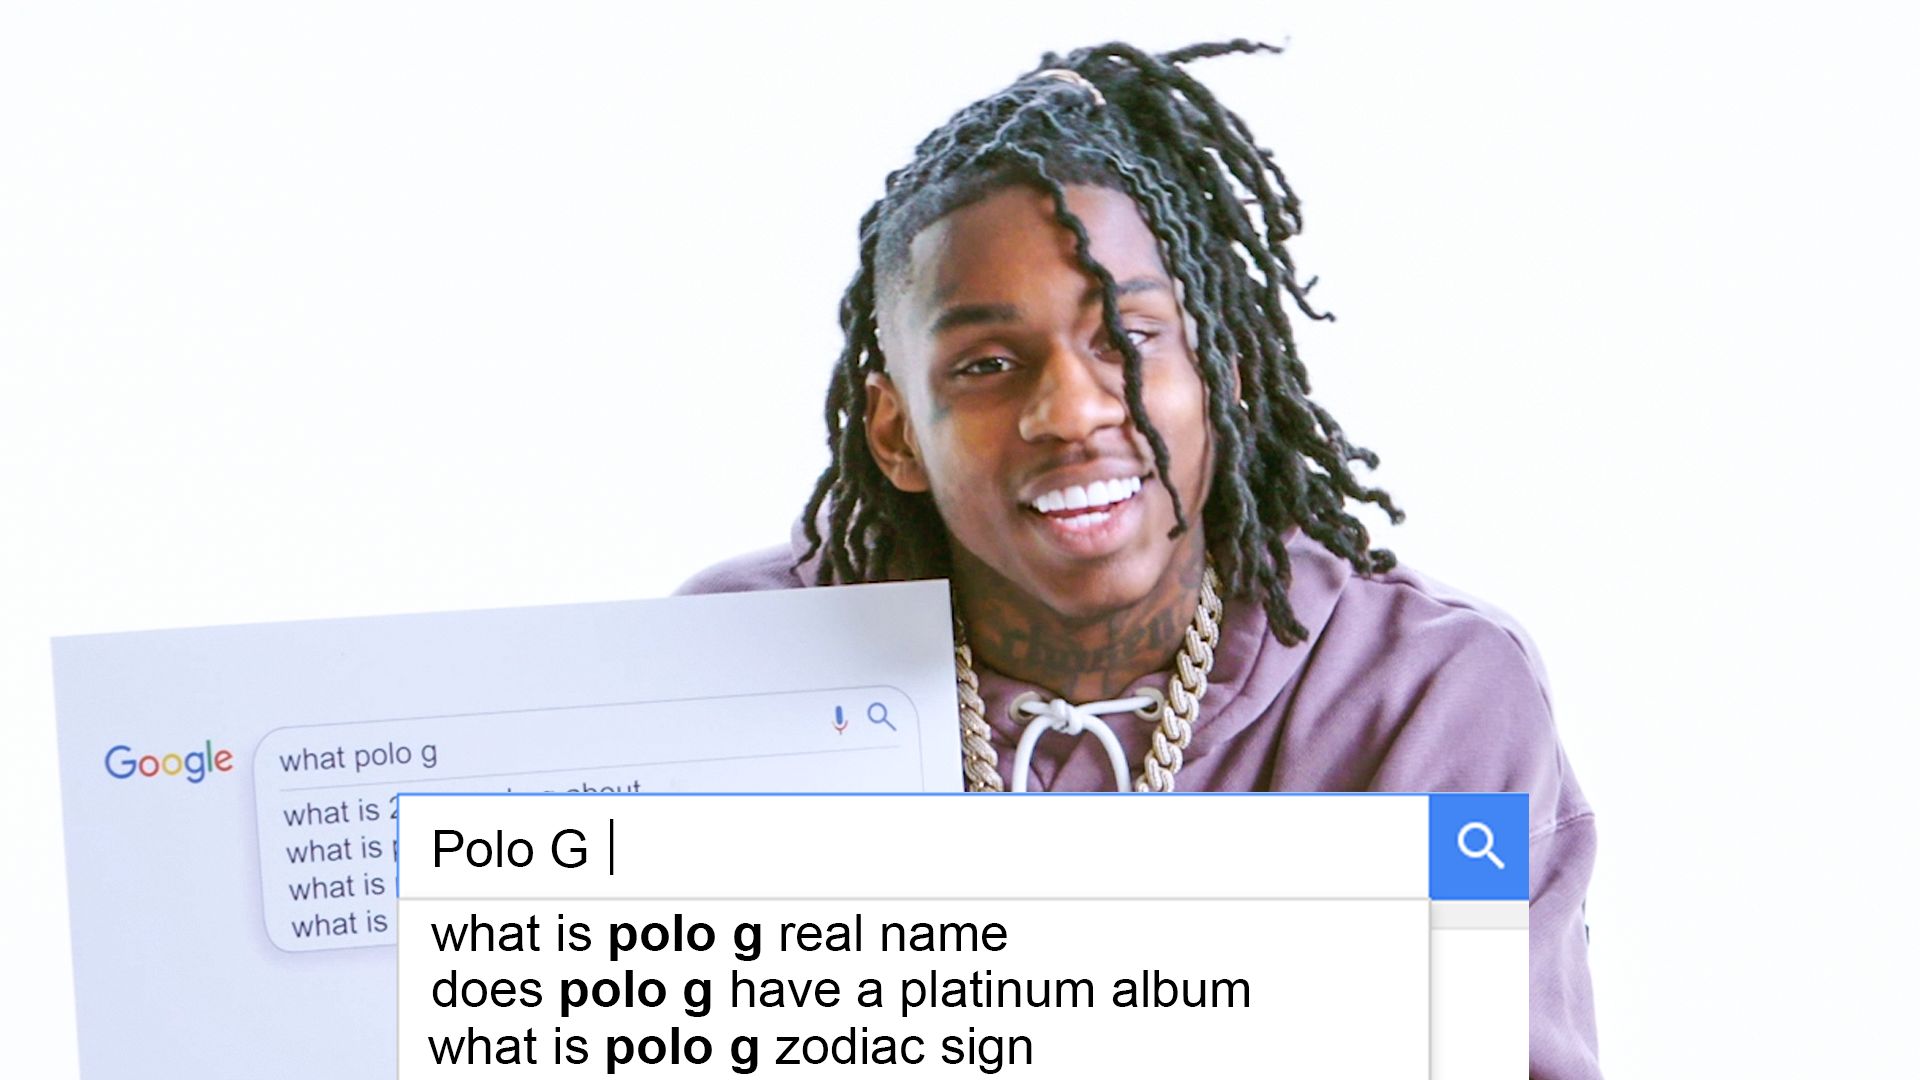 Watch Polo G Answers the Web's Most Searched Questions